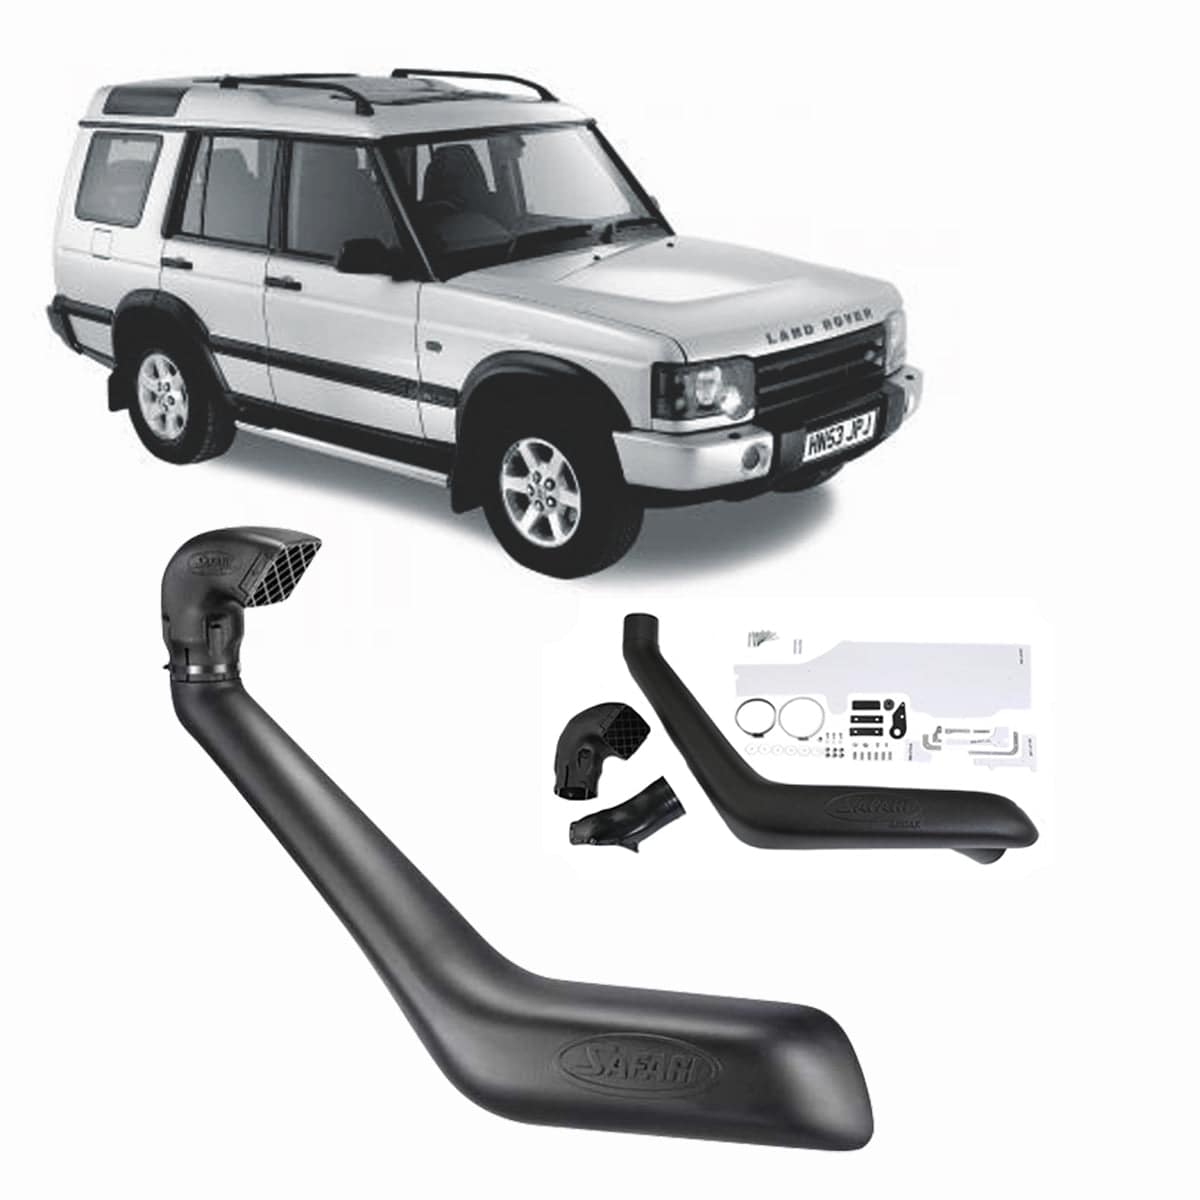 Safari Snorkel to suit Land Rover Discovery - OZI4X4 PTY LTD